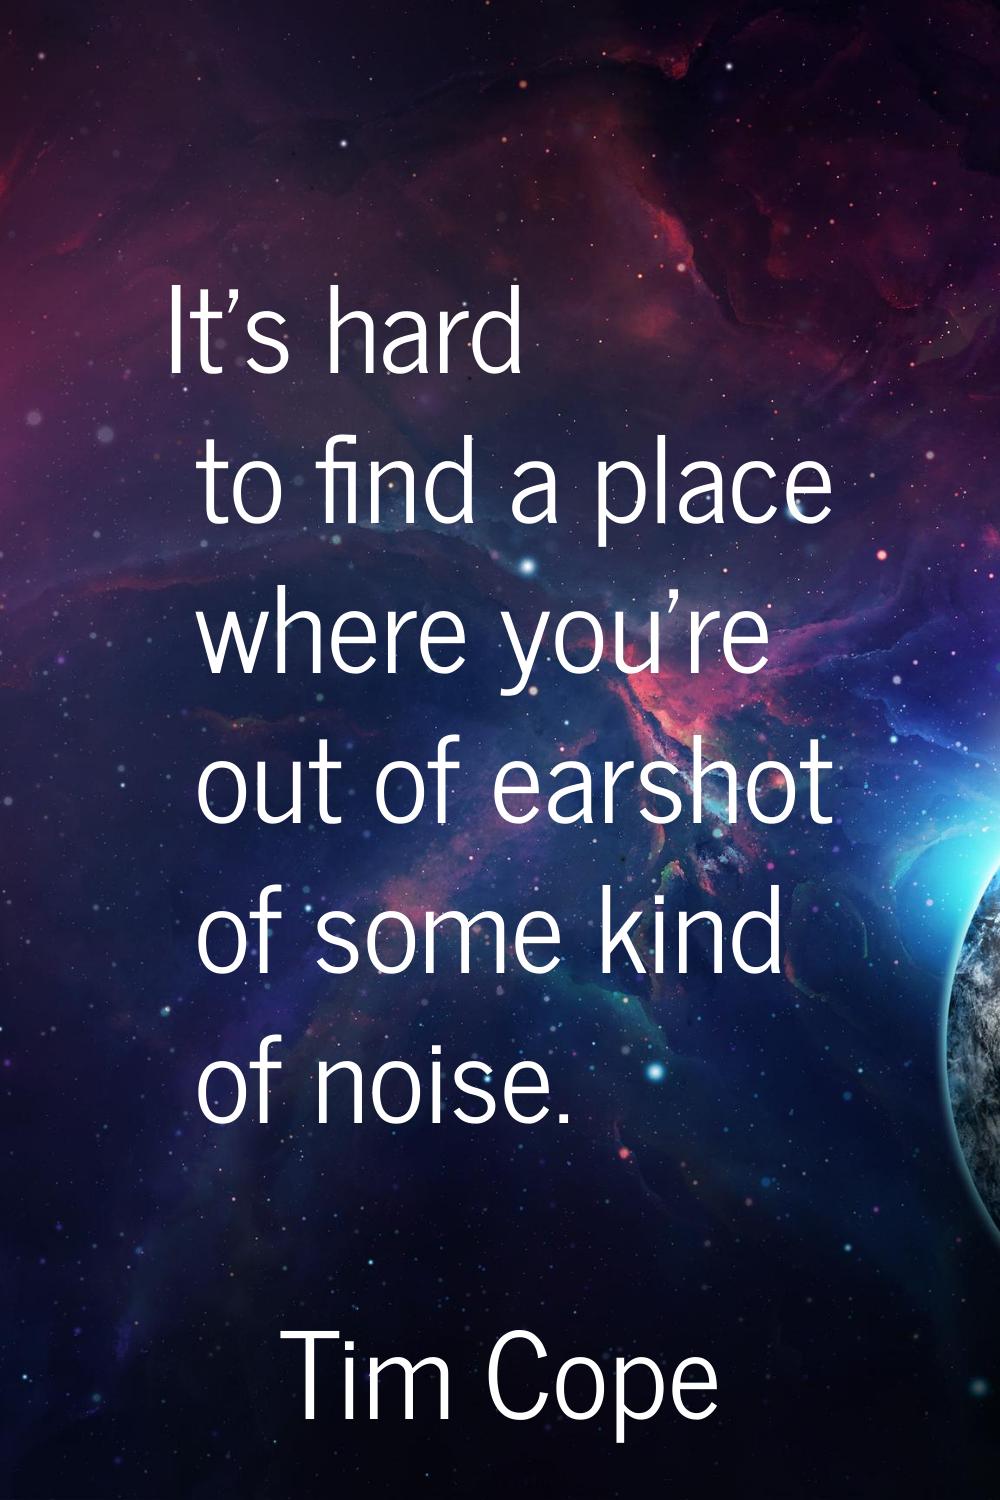 It's hard to find a place where you're out of earshot of some kind of noise.